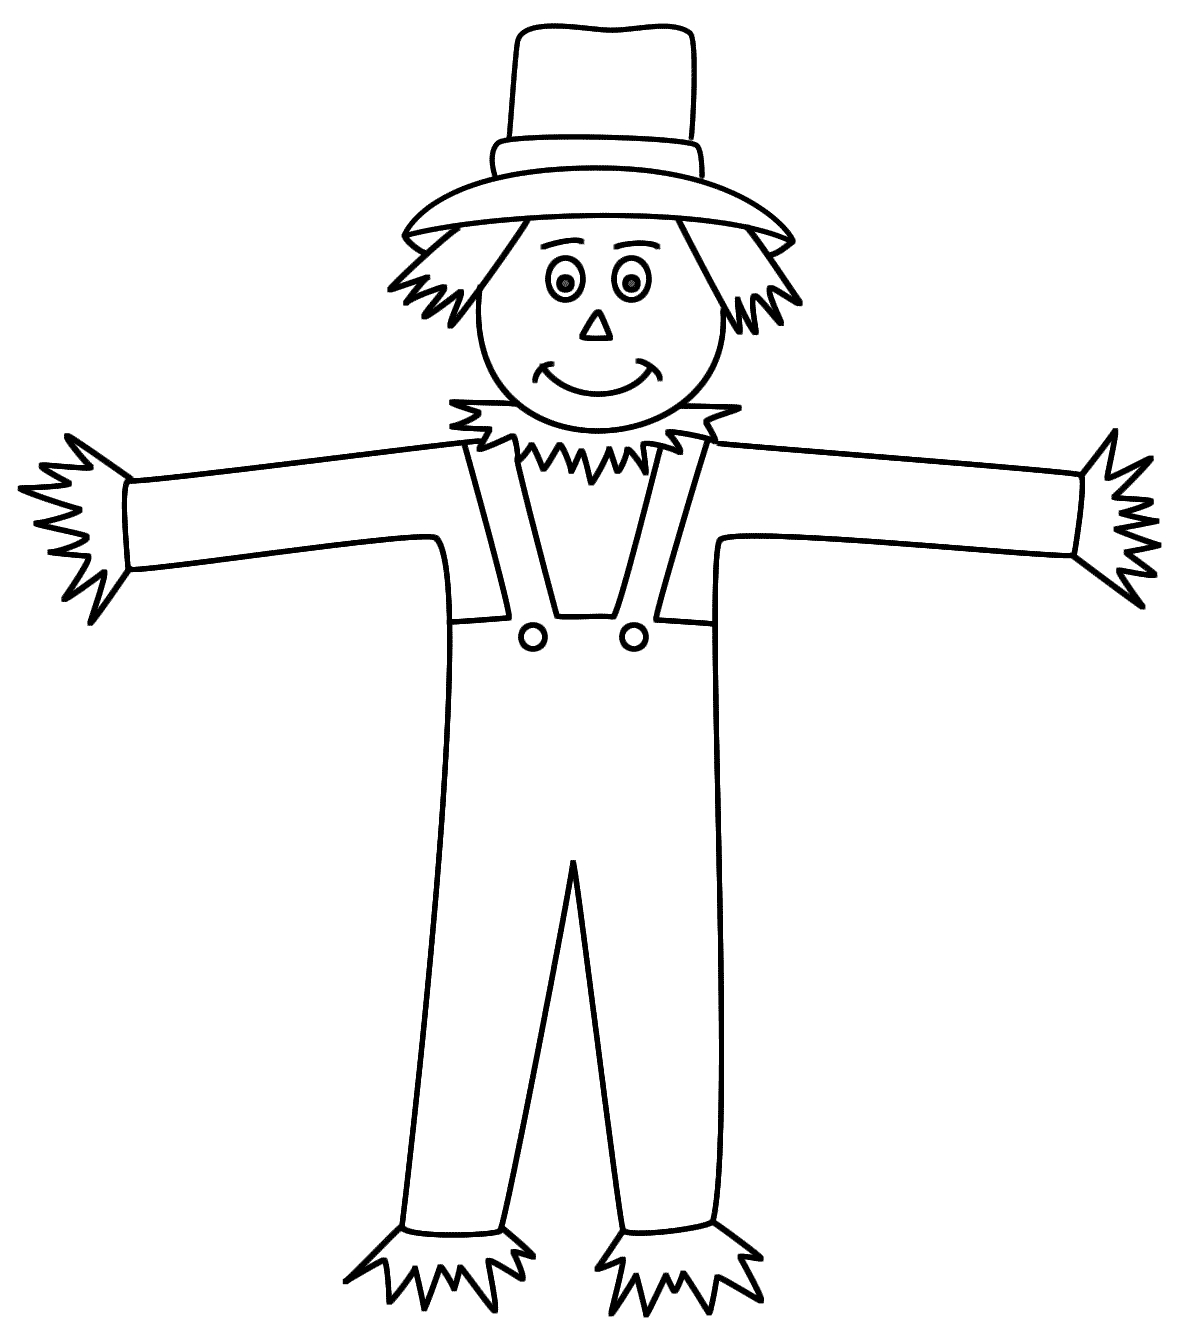 Scarecrow Coloring Pages For Preschoolers - Coloring Home - Free Scarecrow Template Printable